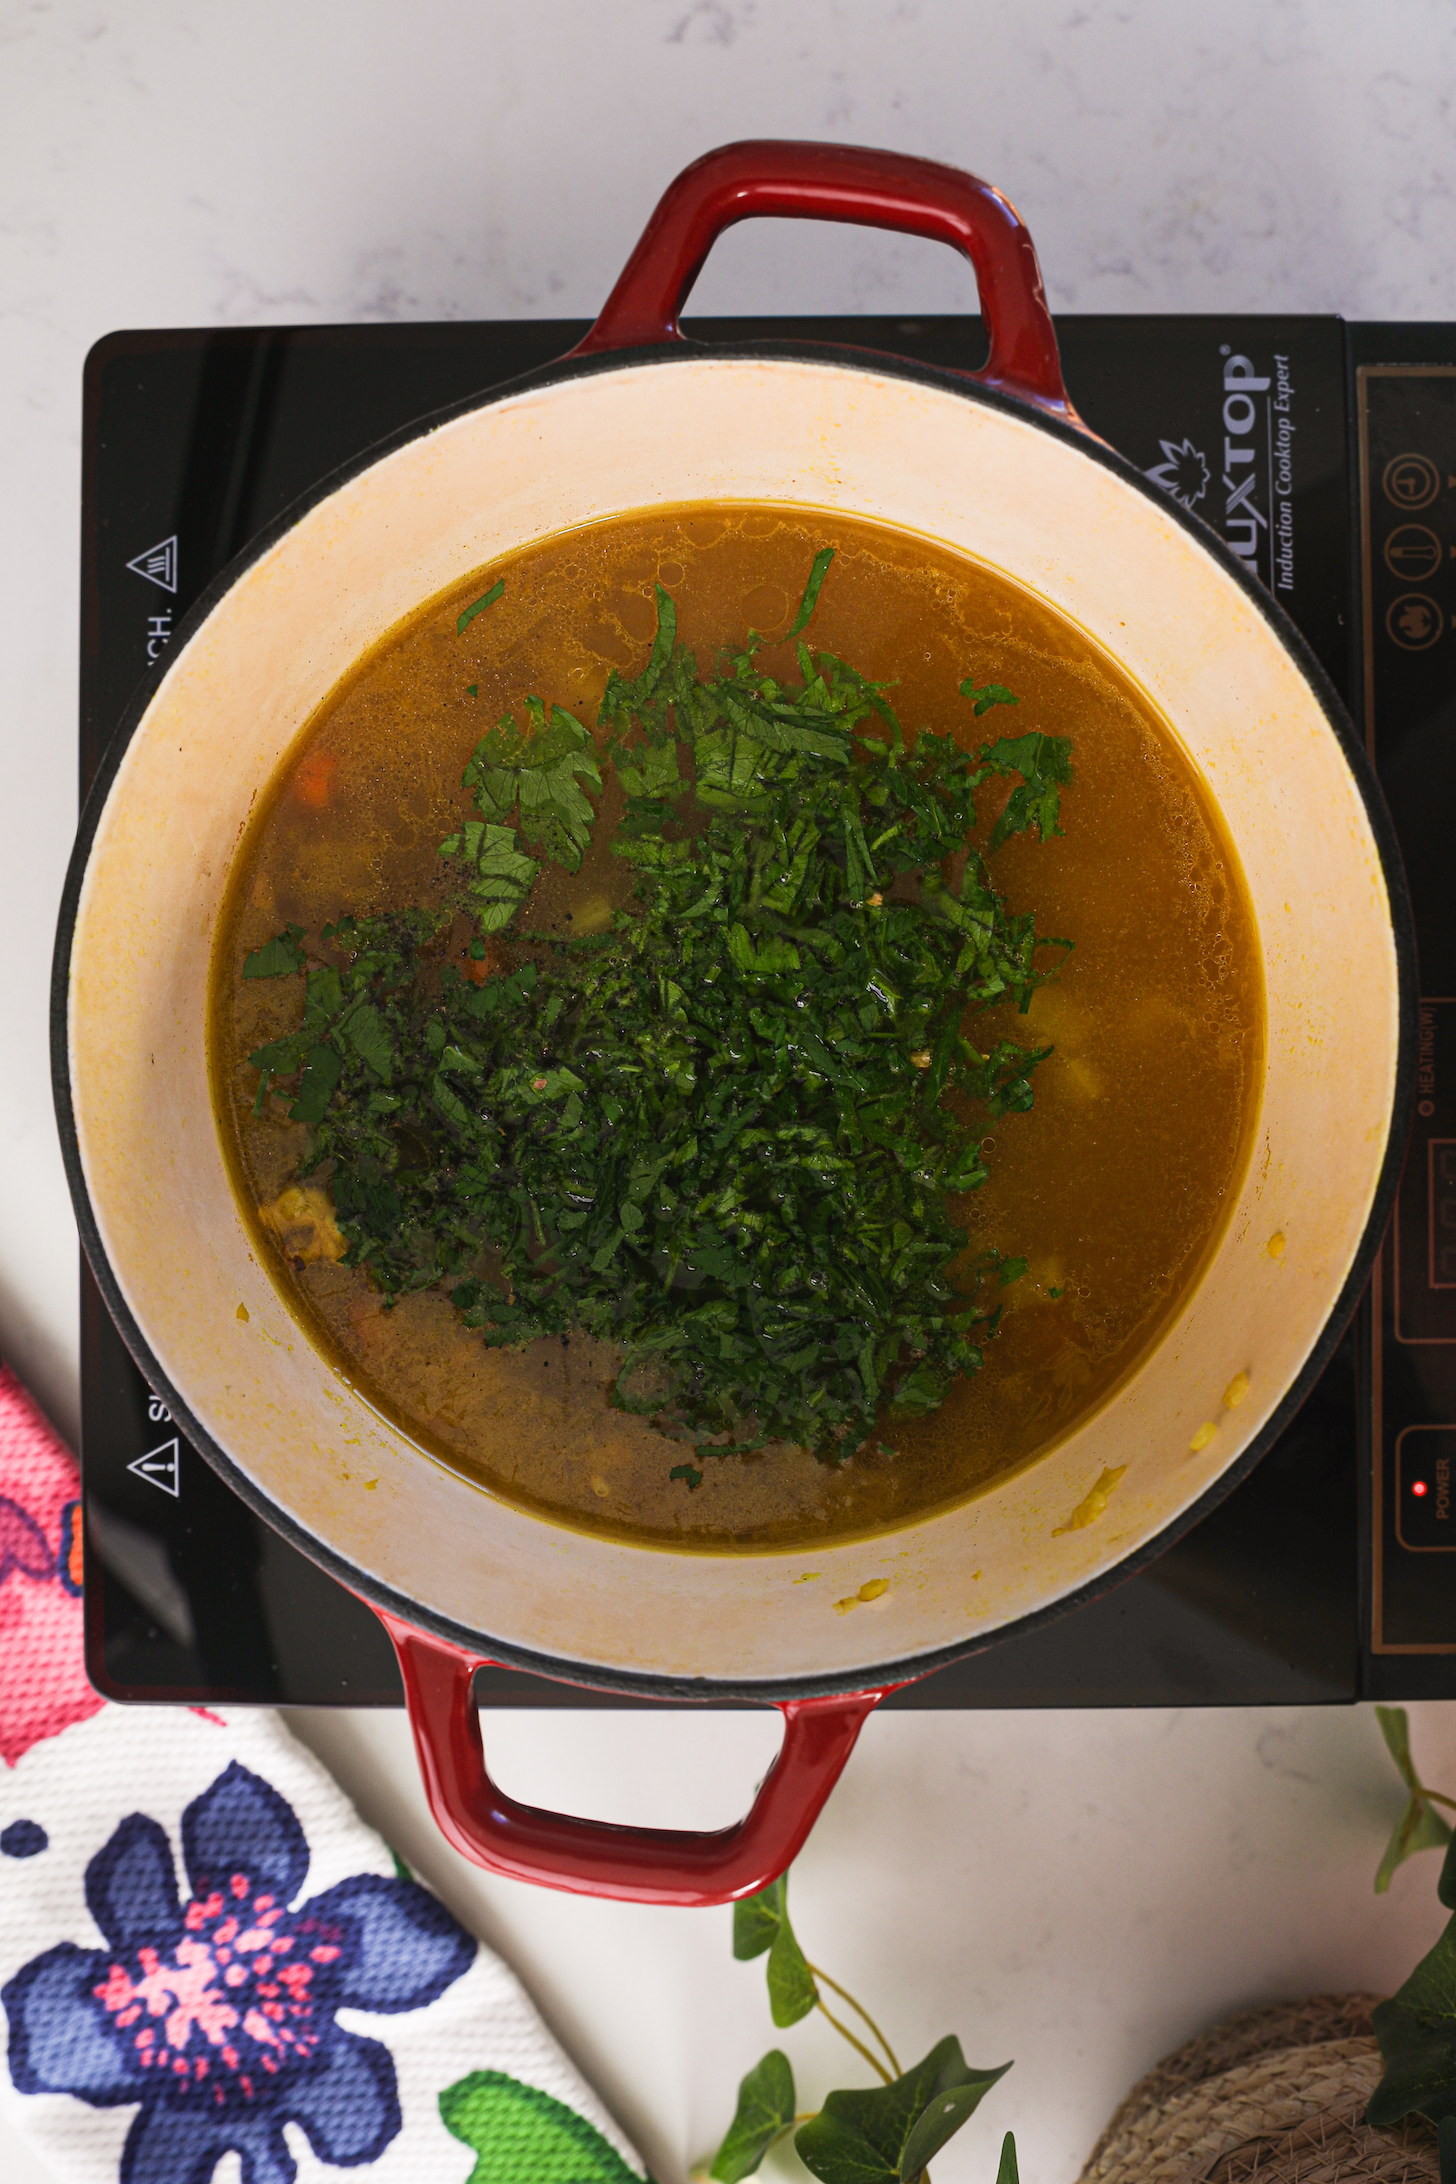 A cooking pot of broth with herbs floating on it.